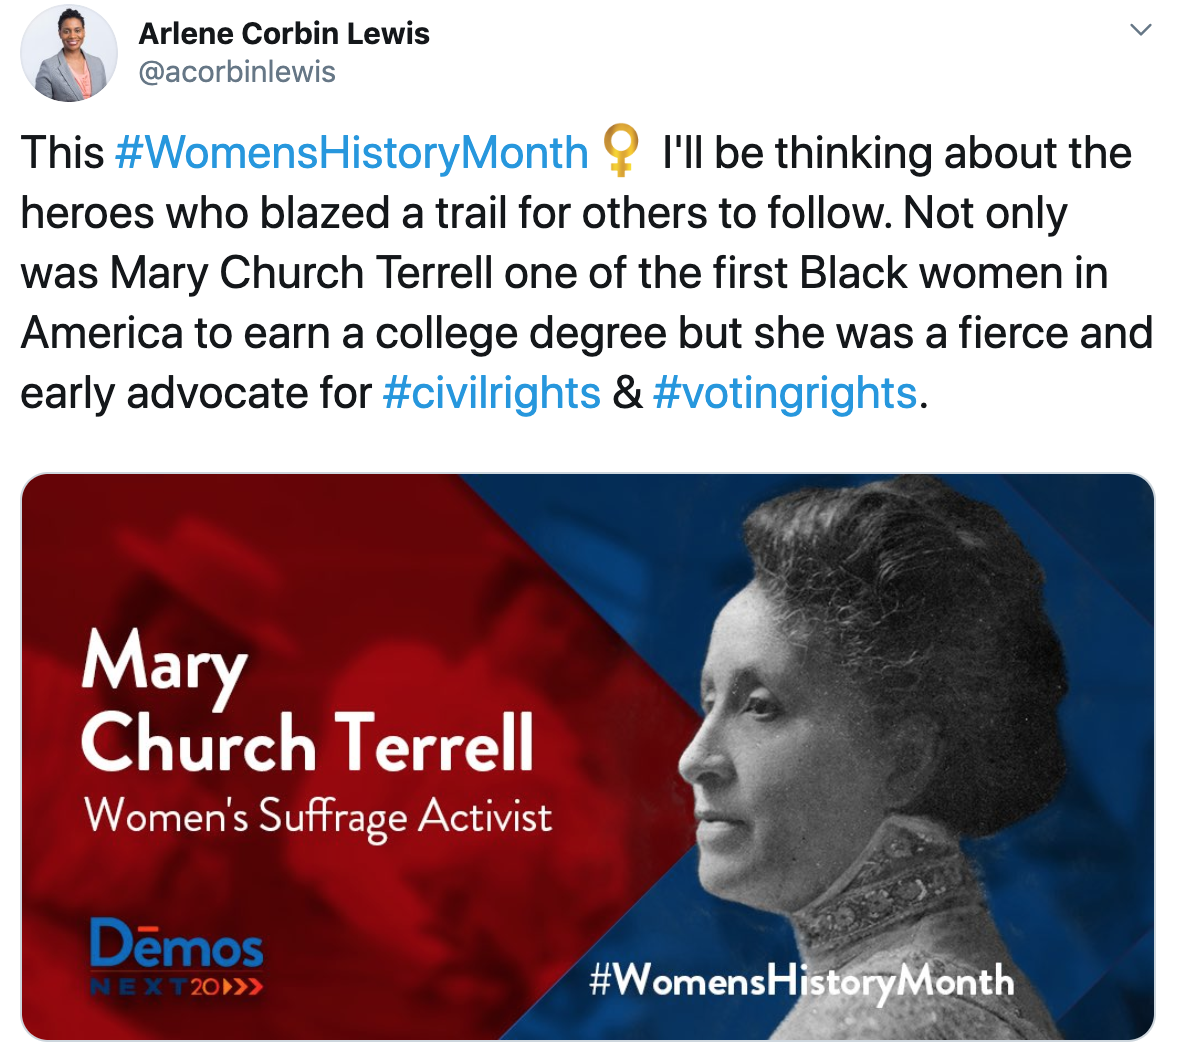 This Womens History Month I''ll be thinking about the heroes who blazed a trail for others to follow. Not only was Mary Church Terrell one of the first Black women in Amerca to earn a college degree but she was a fierce and early advocate for civil rights and voting rights. - Arlene Corbin Lewis